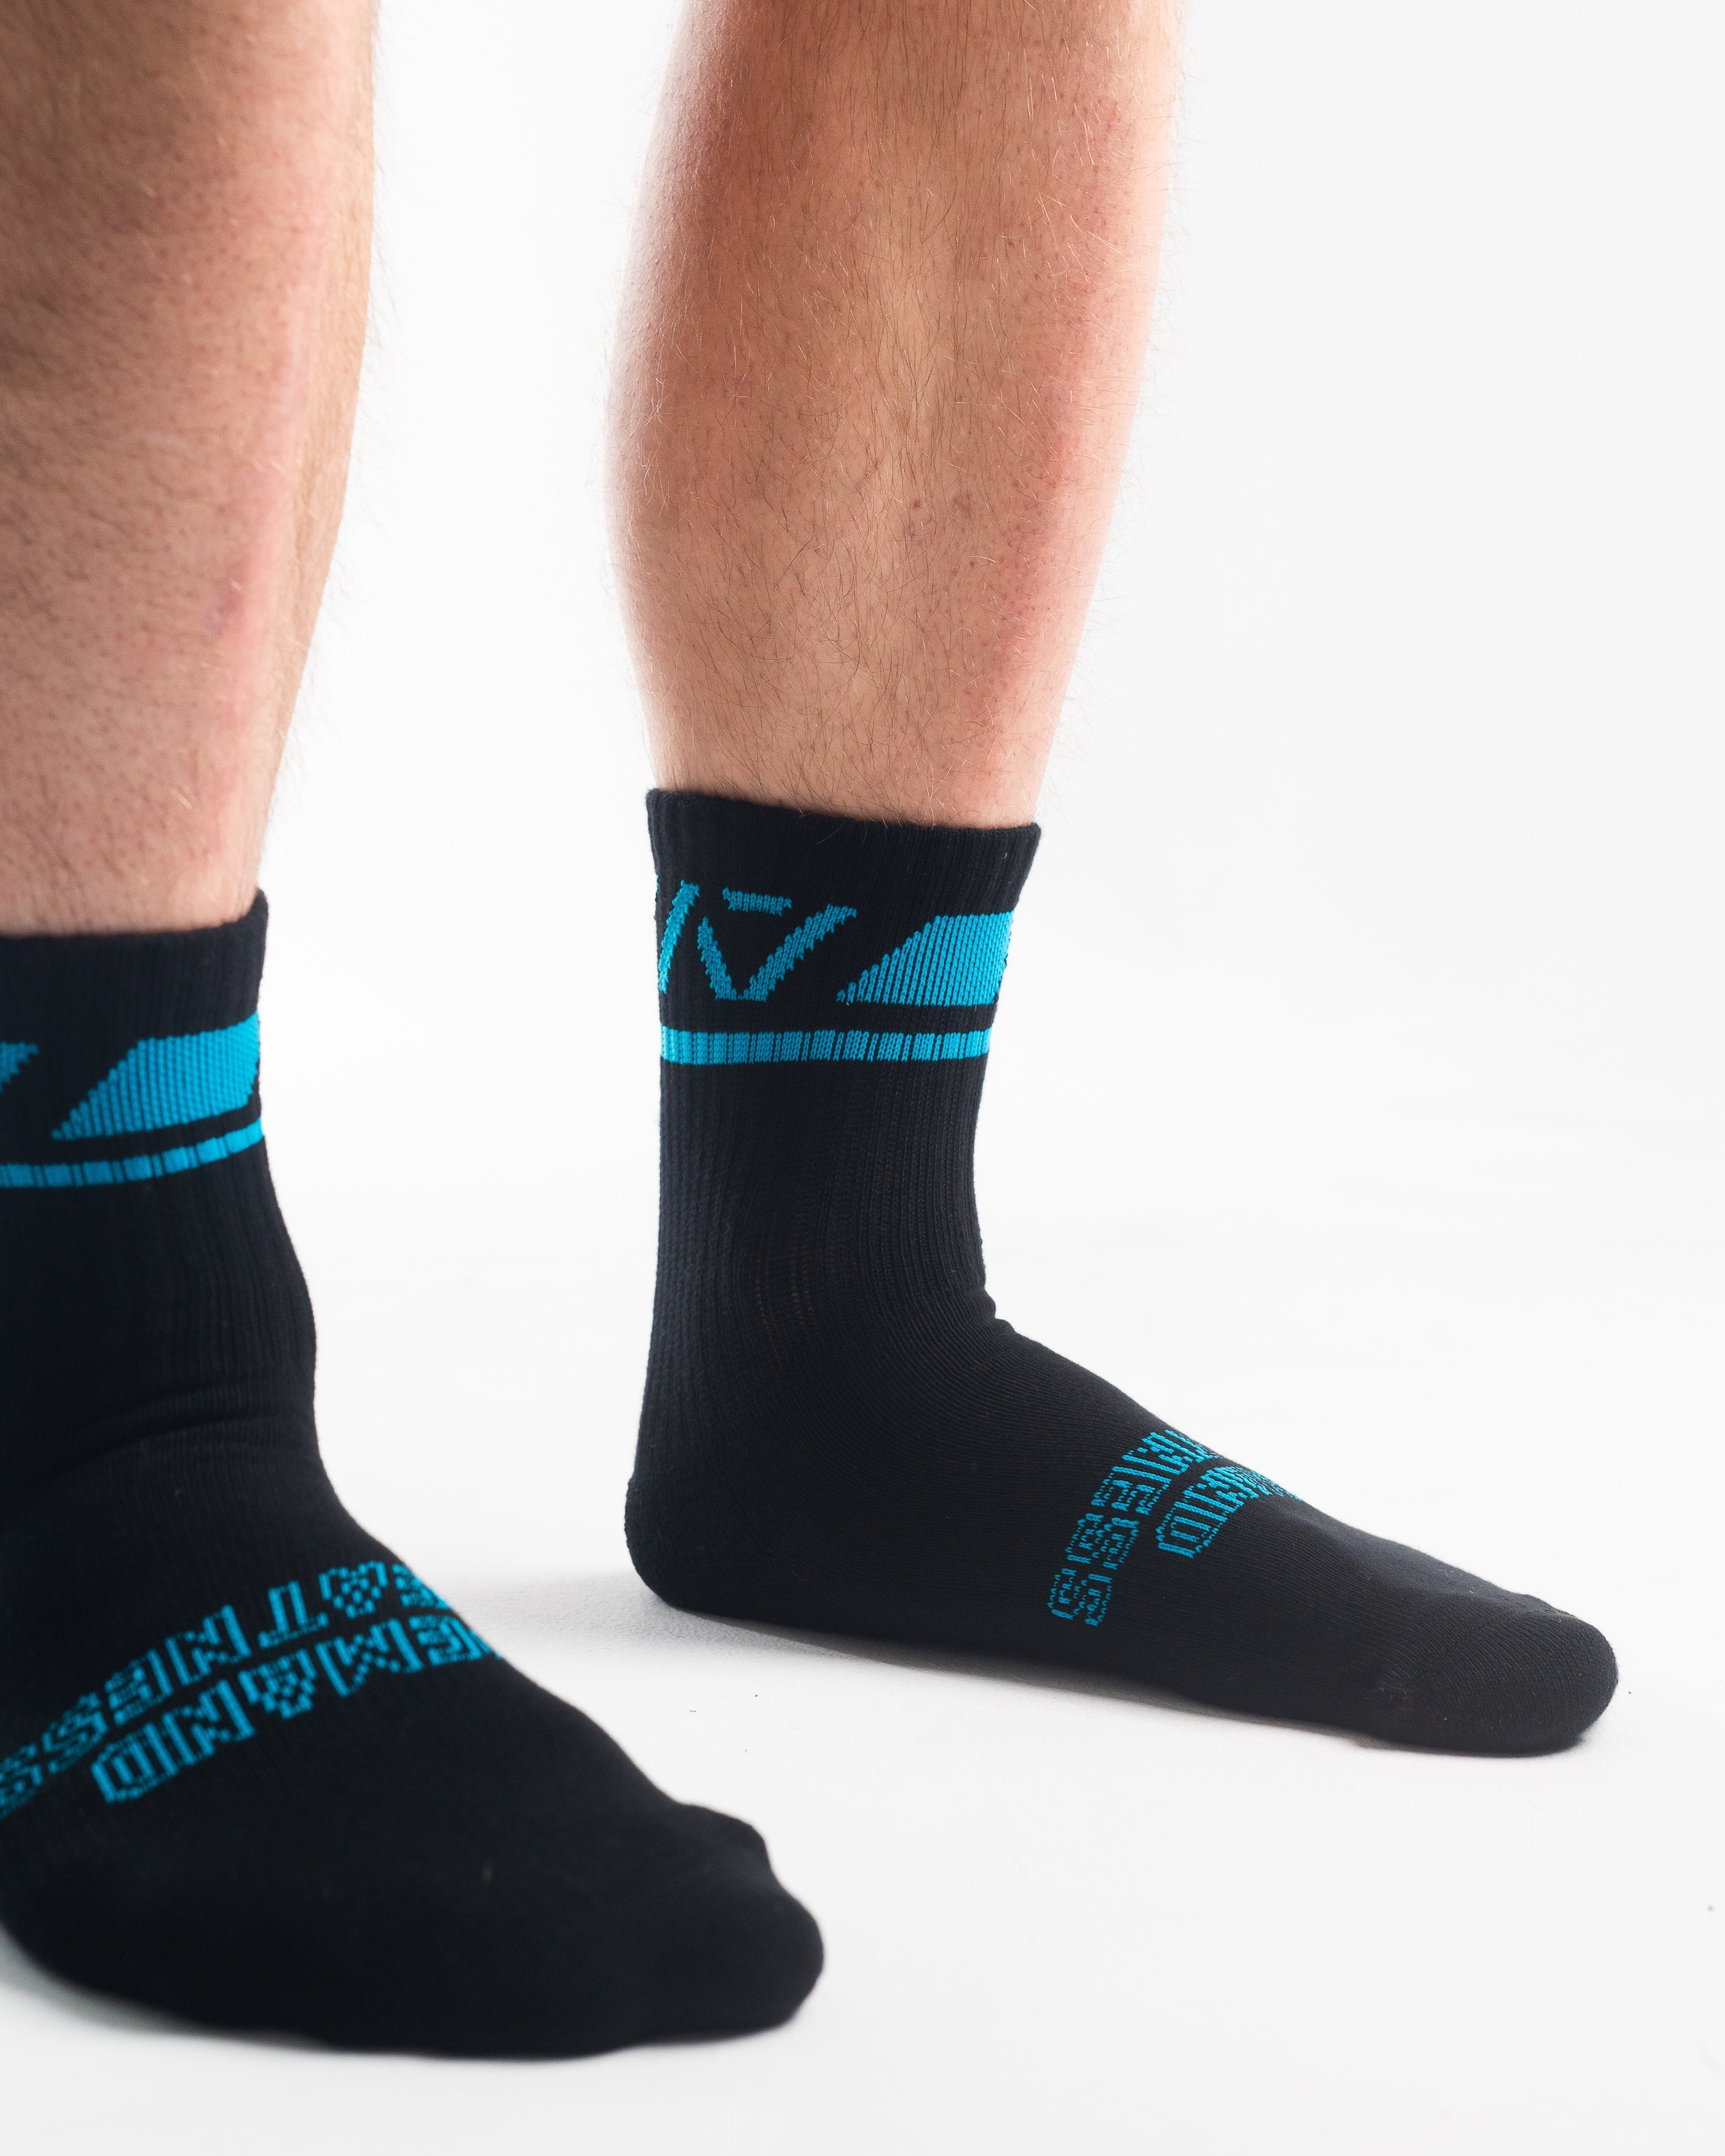 A7 Azul Crew socks showcase blue logos and let your energy show on the platform, in your training or while out and about. The IPF Approved Azul Meet Kit includes Powerlifting Singlet, A7 Meet Shirt, A7 Deadlift Socks. All A7 Powerlifting Equipment shipping to UK, Norway, Switzerland and Iceland.